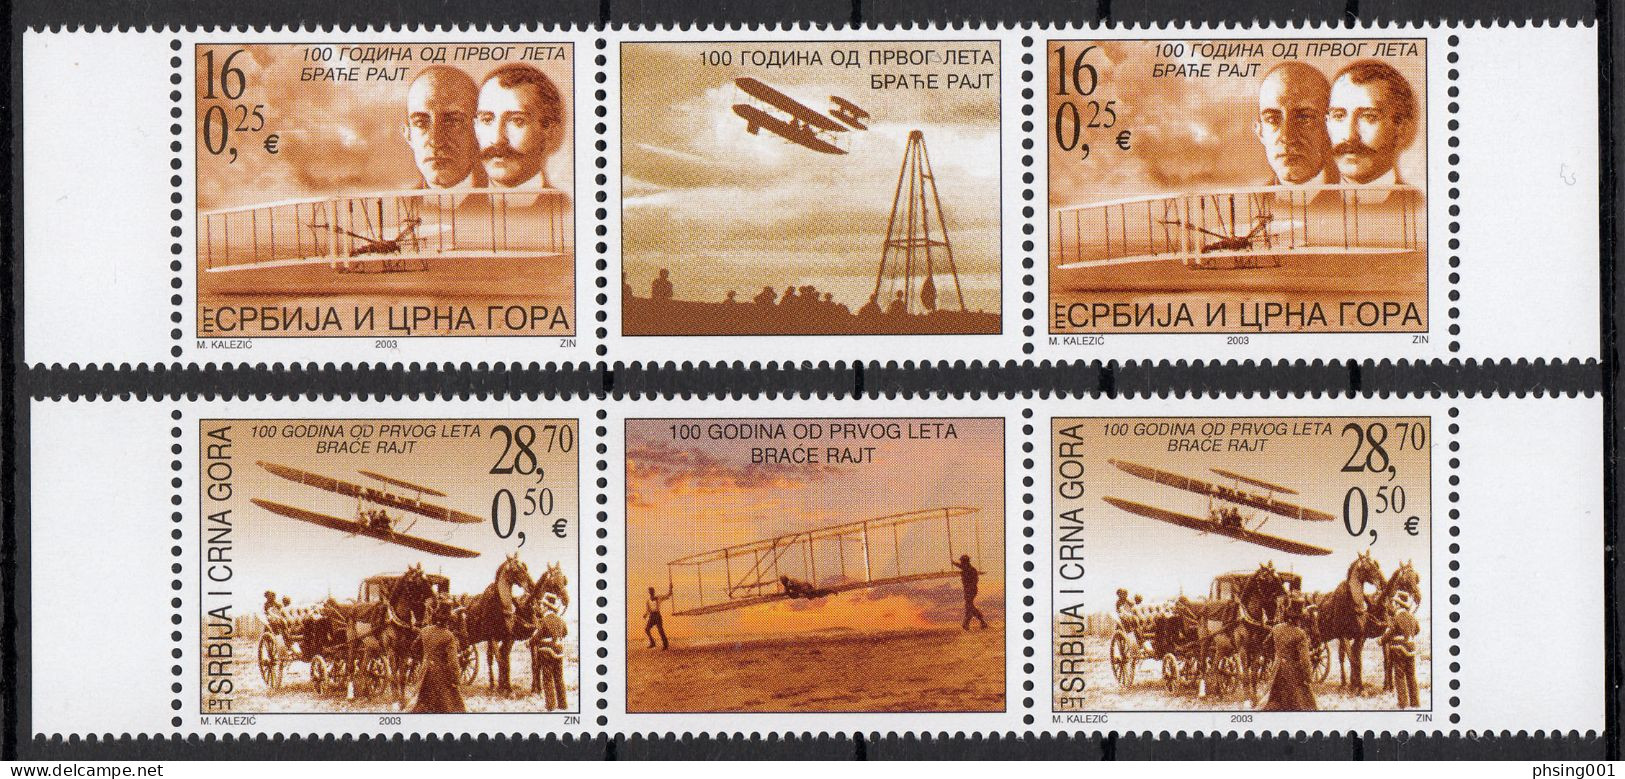 Yugoslavia 2003 Serbia&Montenegro 100 Annive The First Wright Brothers Flight Airplanes Aircrafts Horses, Middle Row MNH - Unused Stamps